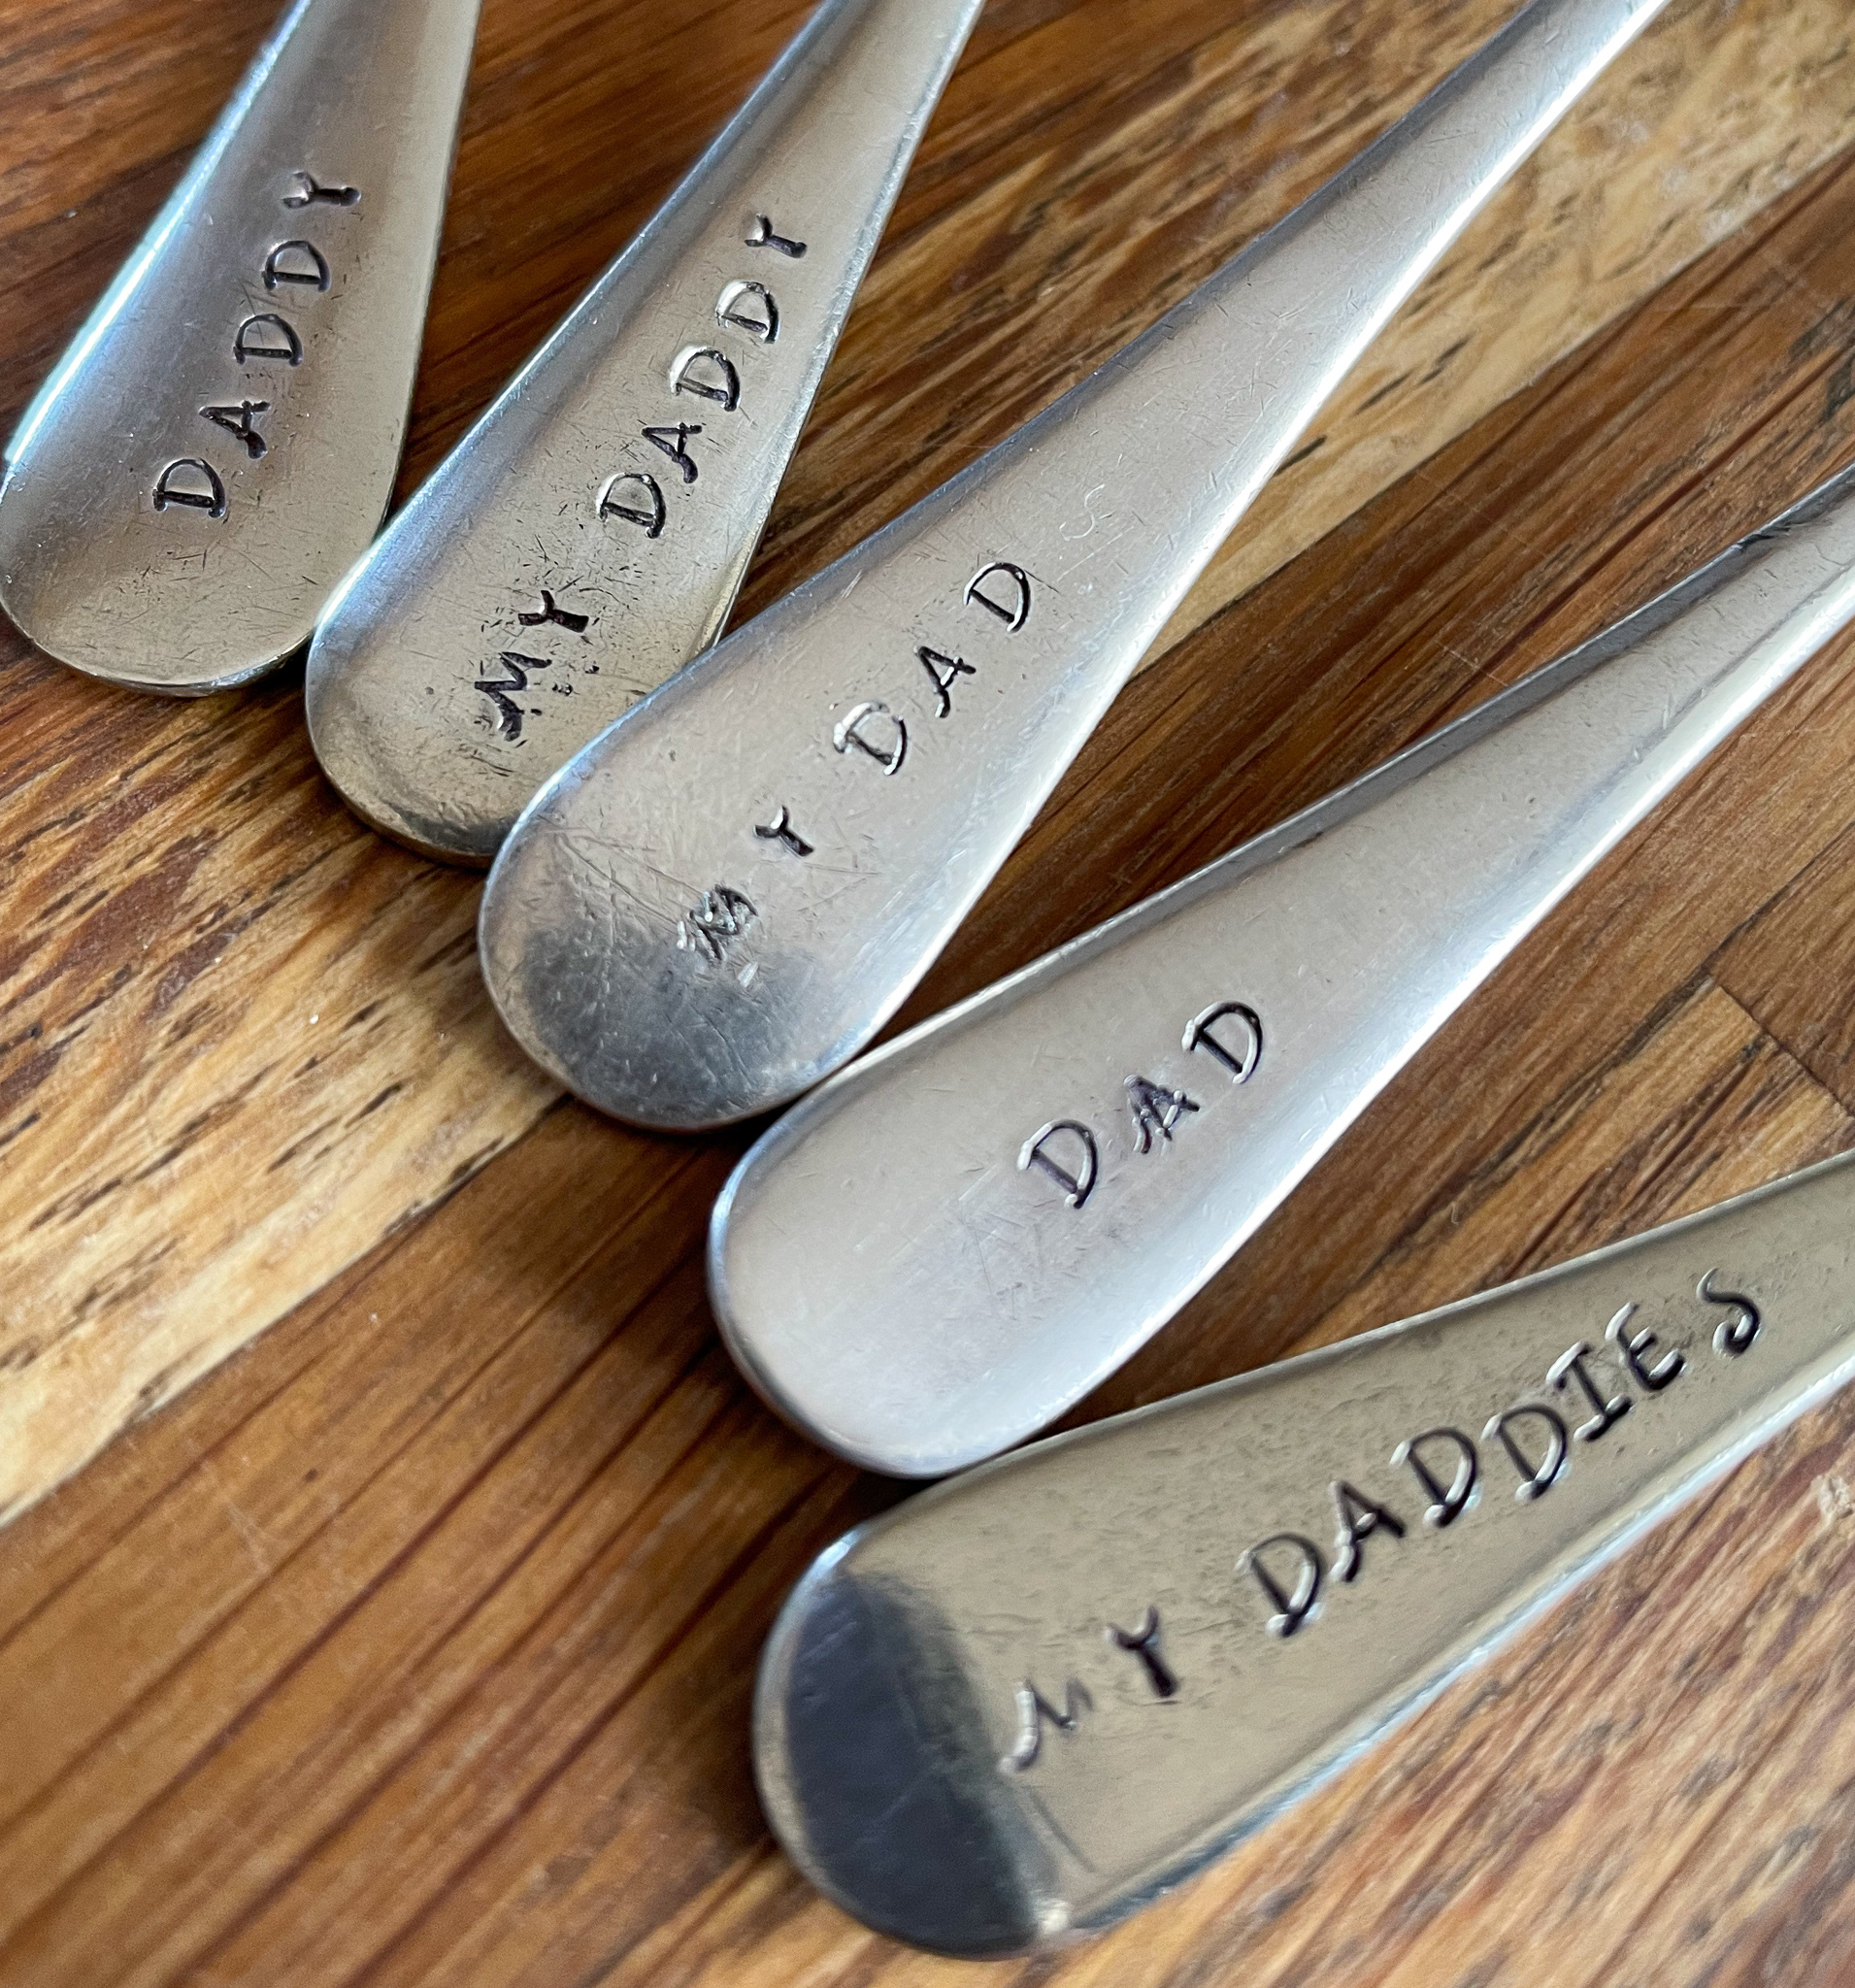 Unique Gift Coffee Spoon Mom Spoon Coffee Gift Vintage Vintage Spoon Hand Stamped Spoon Mom Gift I'm A MOMster Before COFFEE